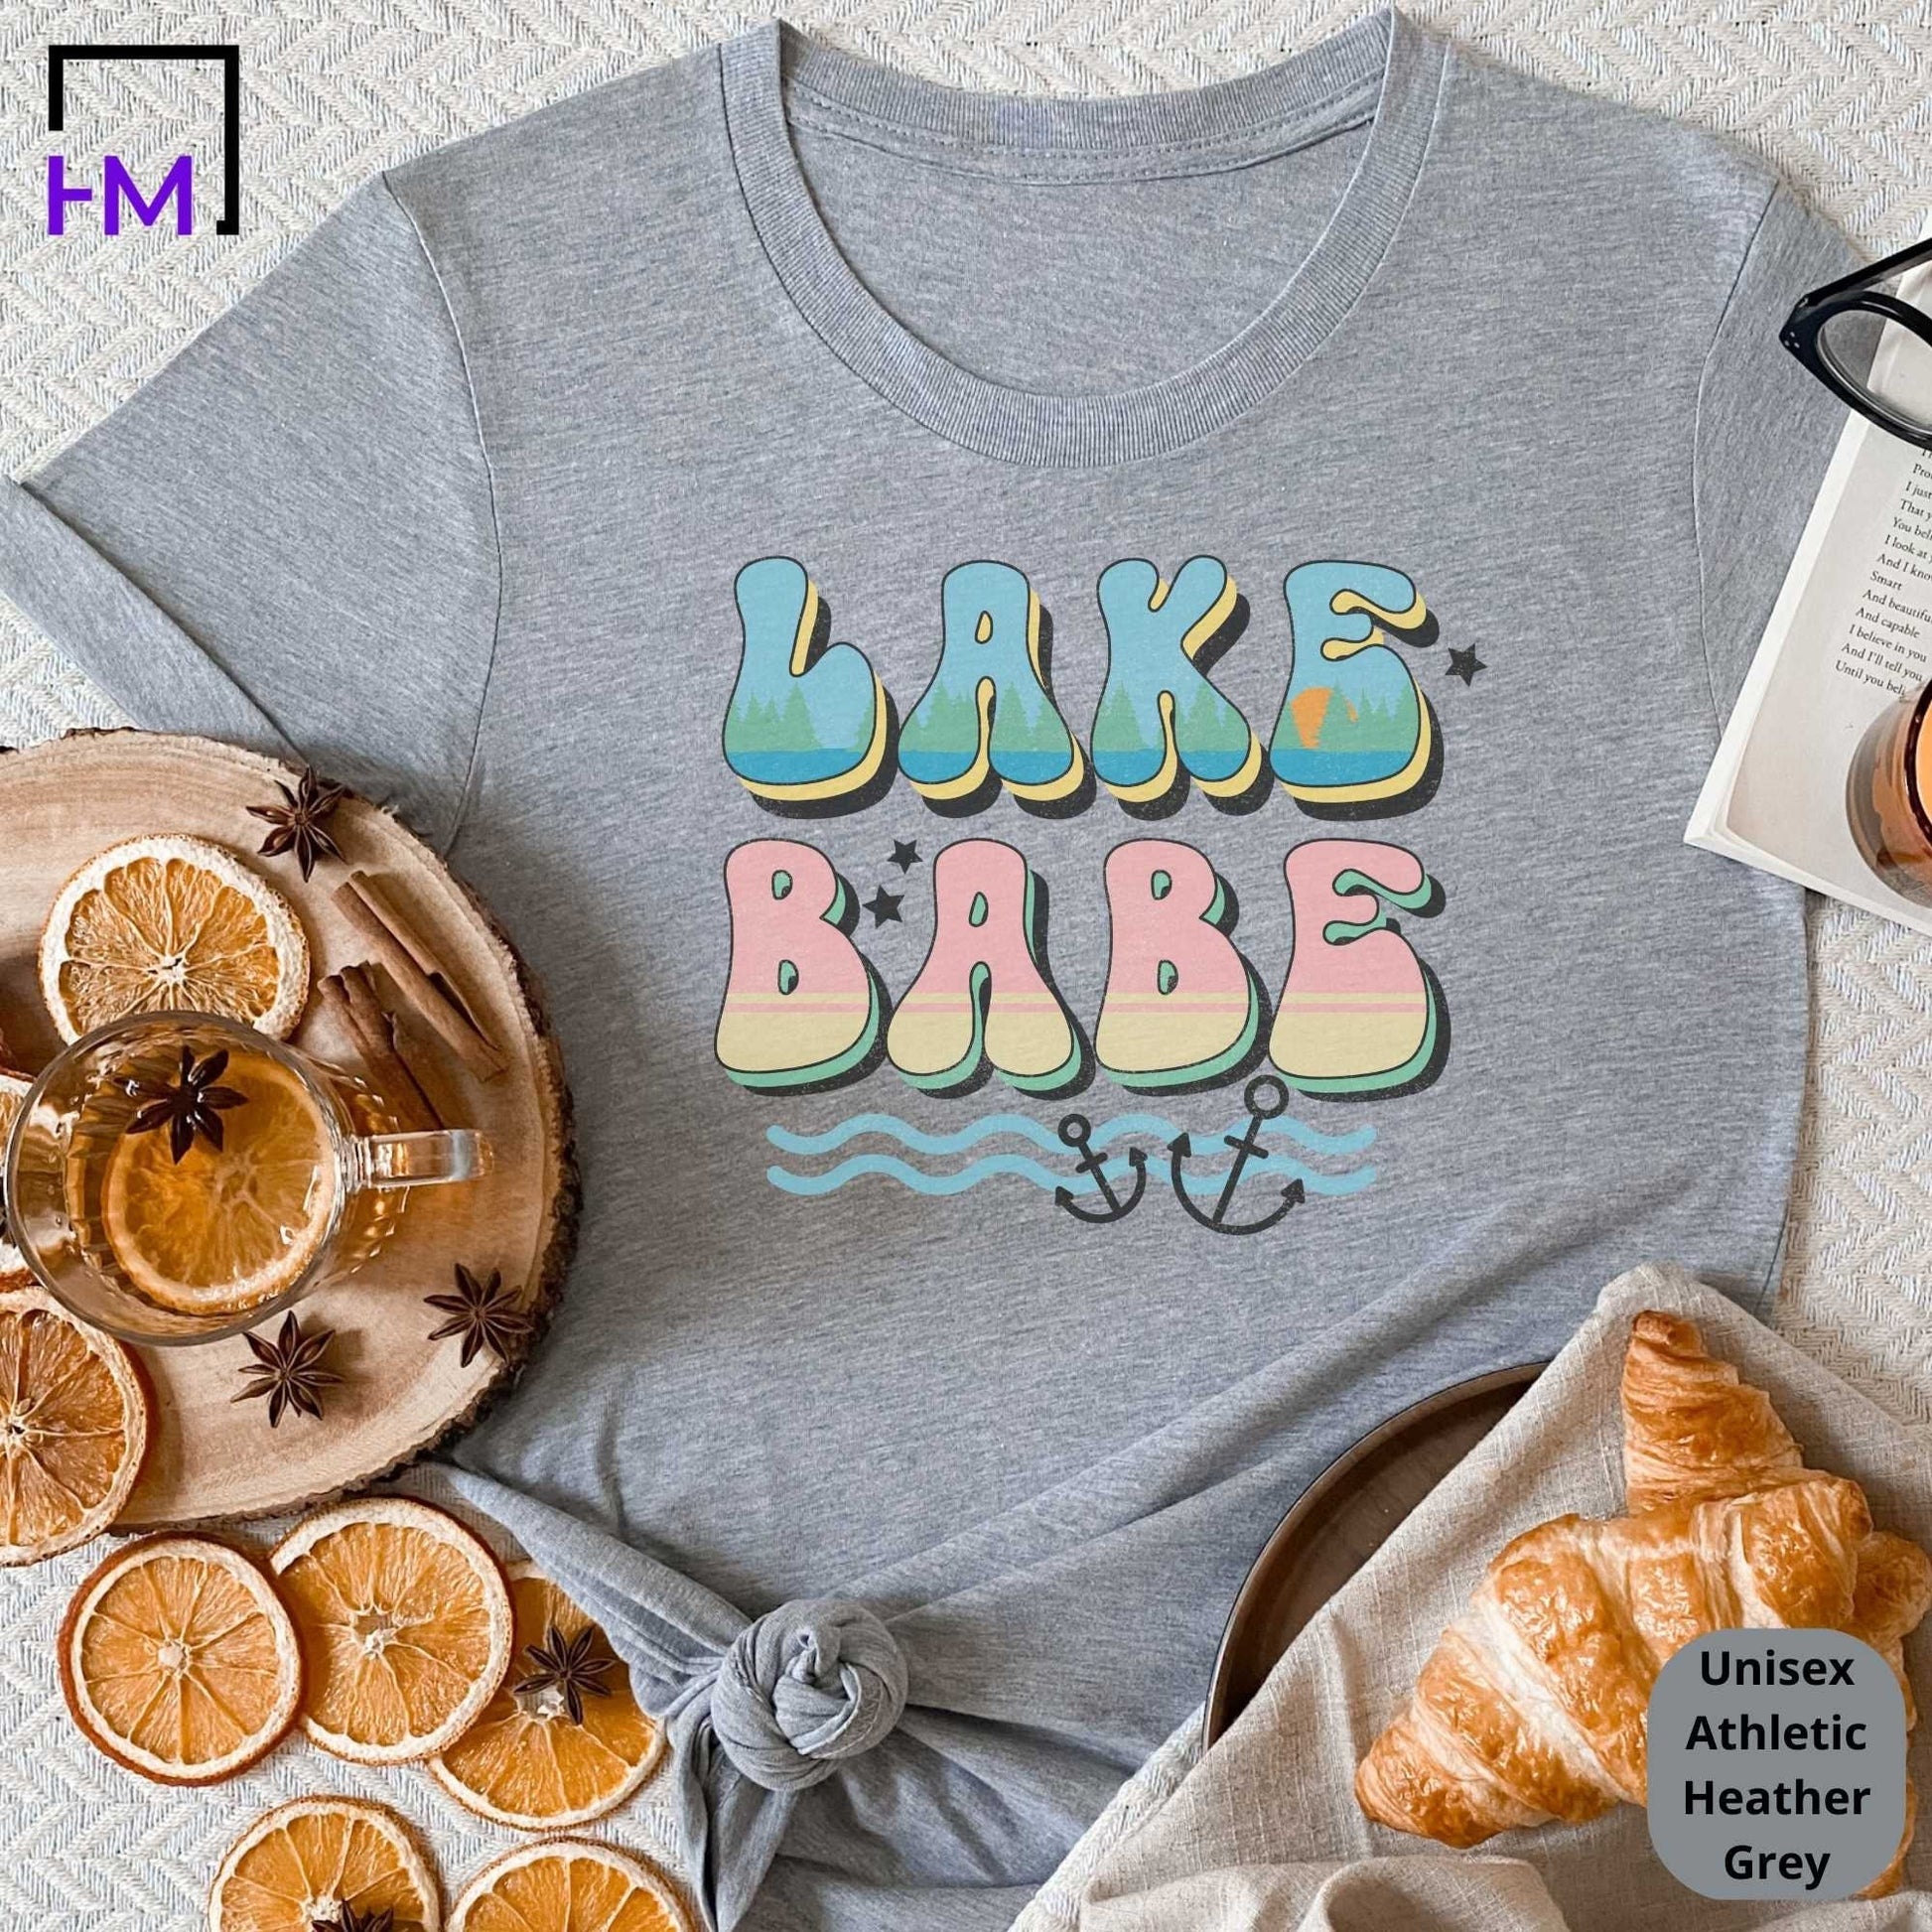 Lake Babe Shirt, Live at the Lake Lover Tee, Boating Tee, Great Boating Gift for Her, Vintage Look Boating Shirt, Lake Tee, Boating Life Tee HMDesignStudioUS